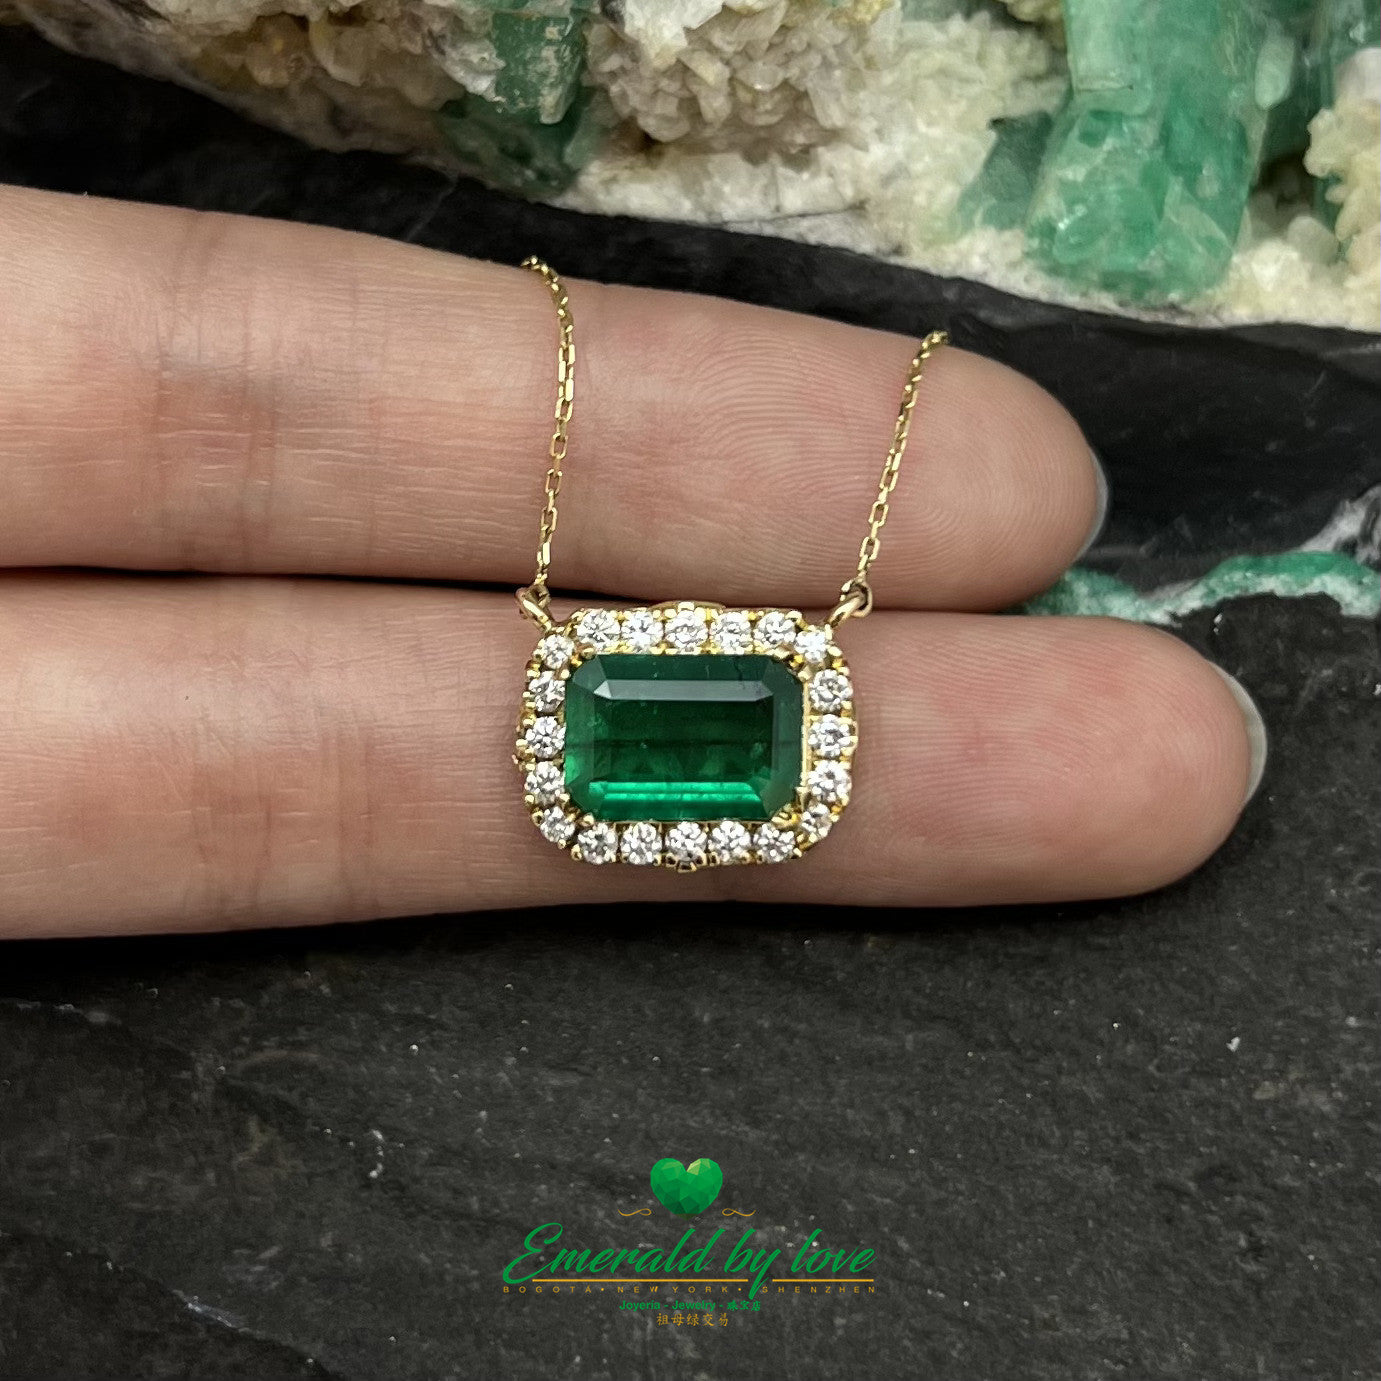 Stunning Yellow Gold Marquise Pendant with 1.85 Ct Emerald Cut Emerald and Diamond Halo